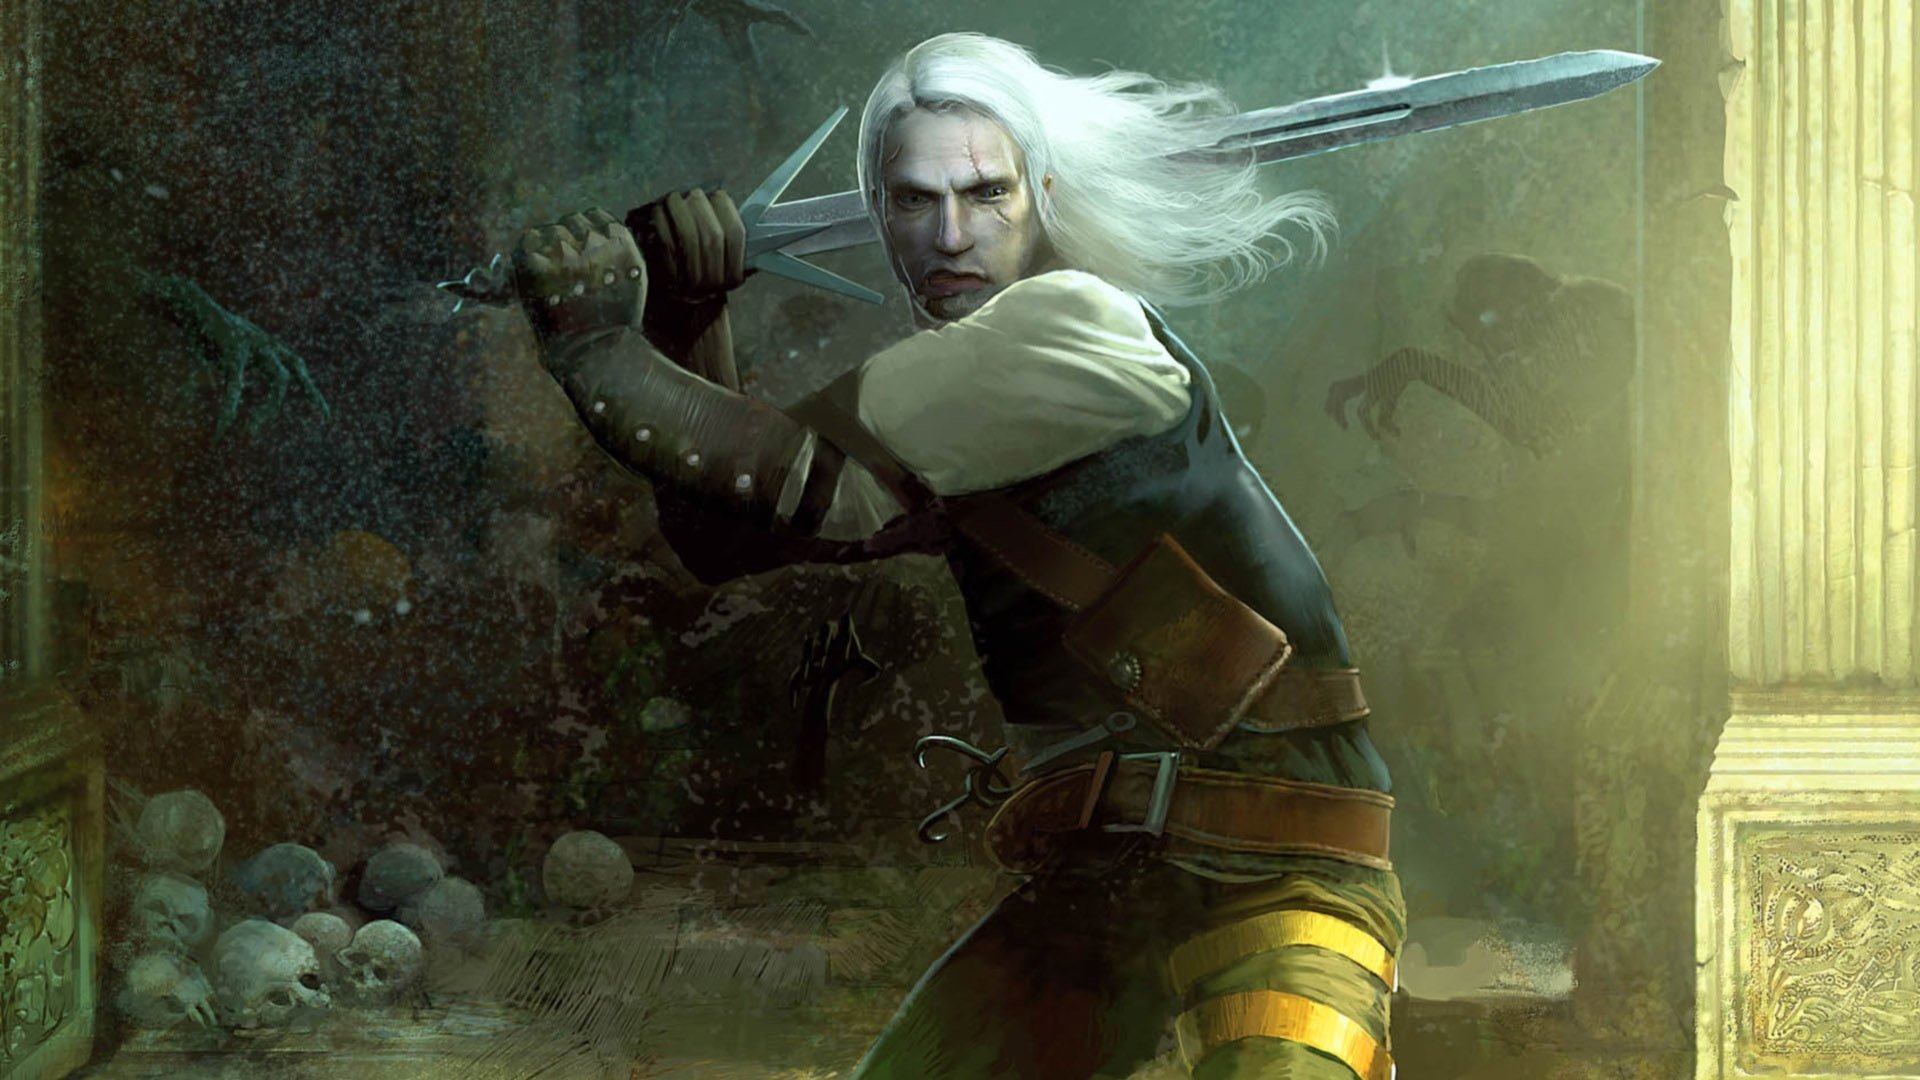 witcher 1 save game download